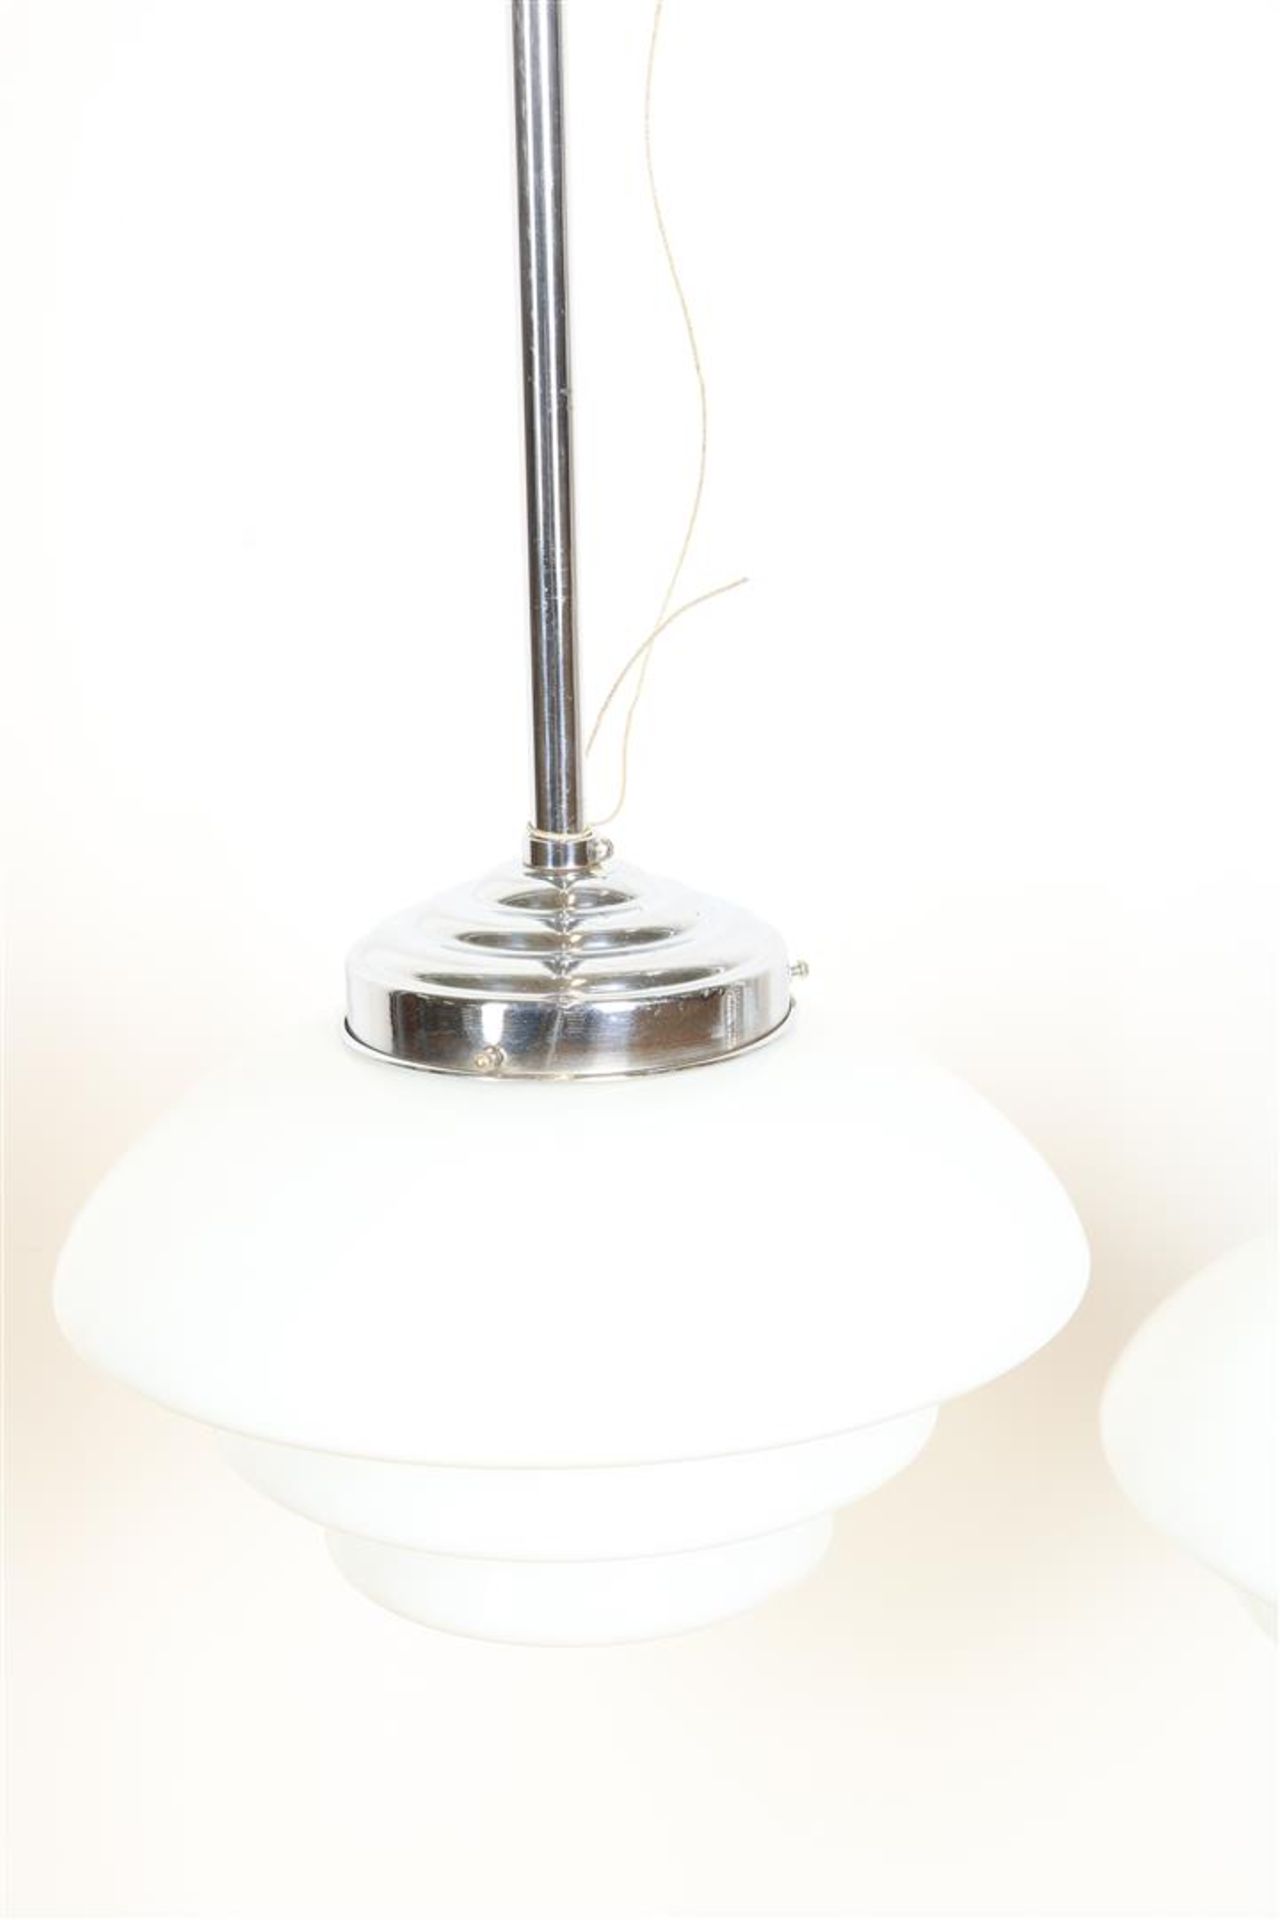 Set of partly chromed Gispen-style hanging lamps with opaline ball shades, h. 80 cm. - Image 2 of 3